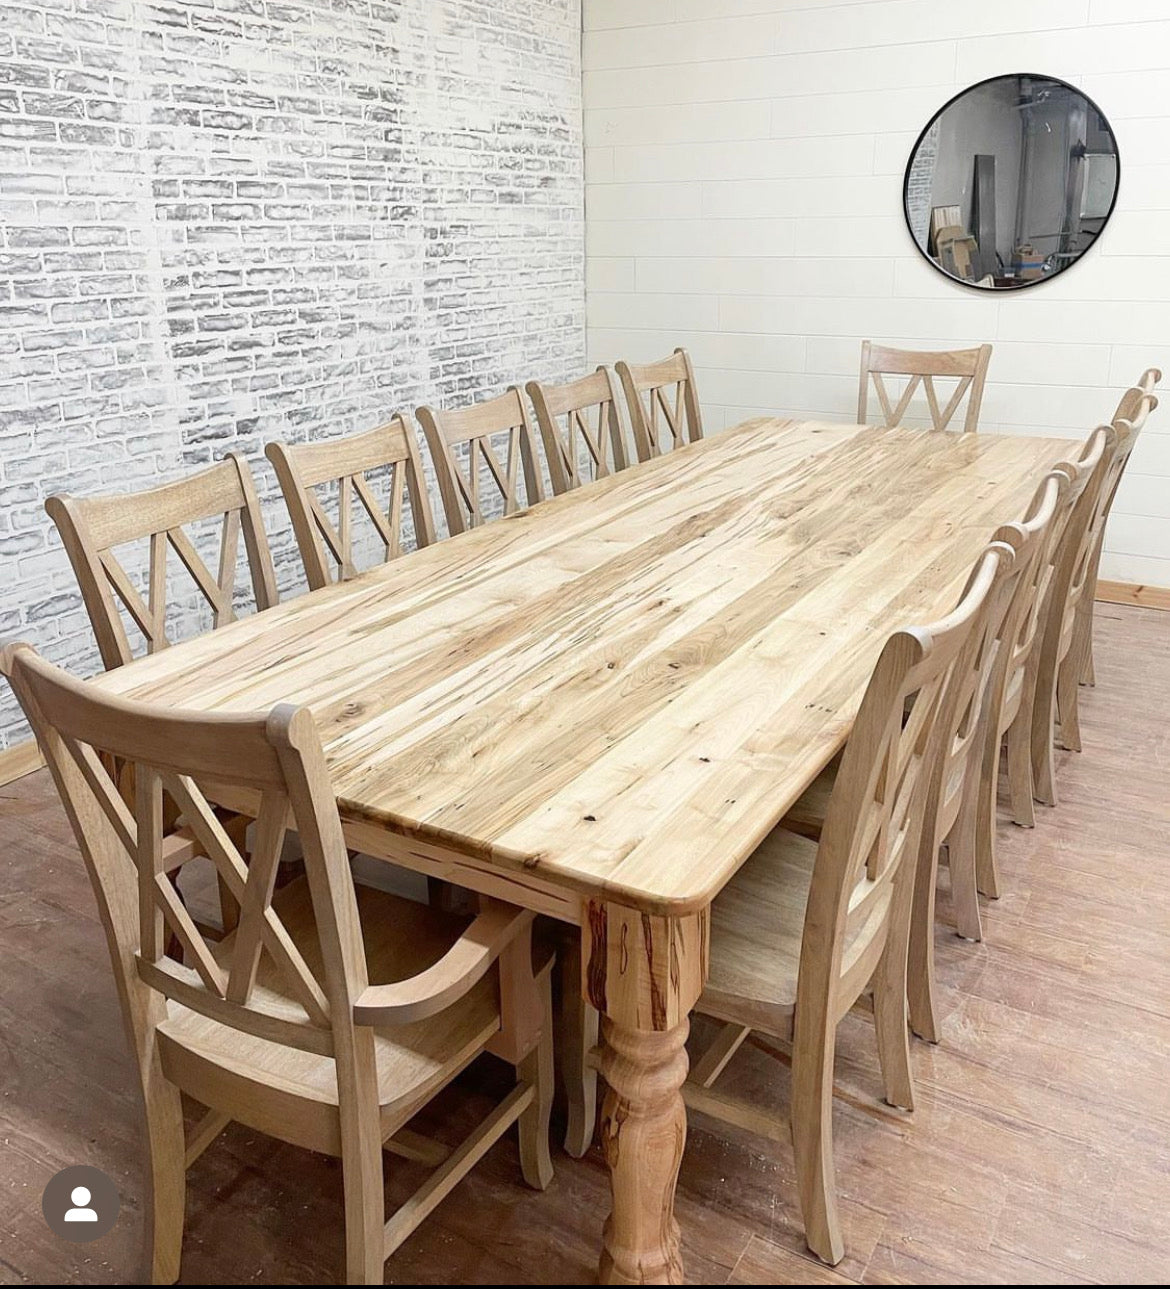 Pictured with a 10' L x 42" W Ambrosia Maple table in a Natural Finish. Pictured with 12 Double Cross Back Chairs.